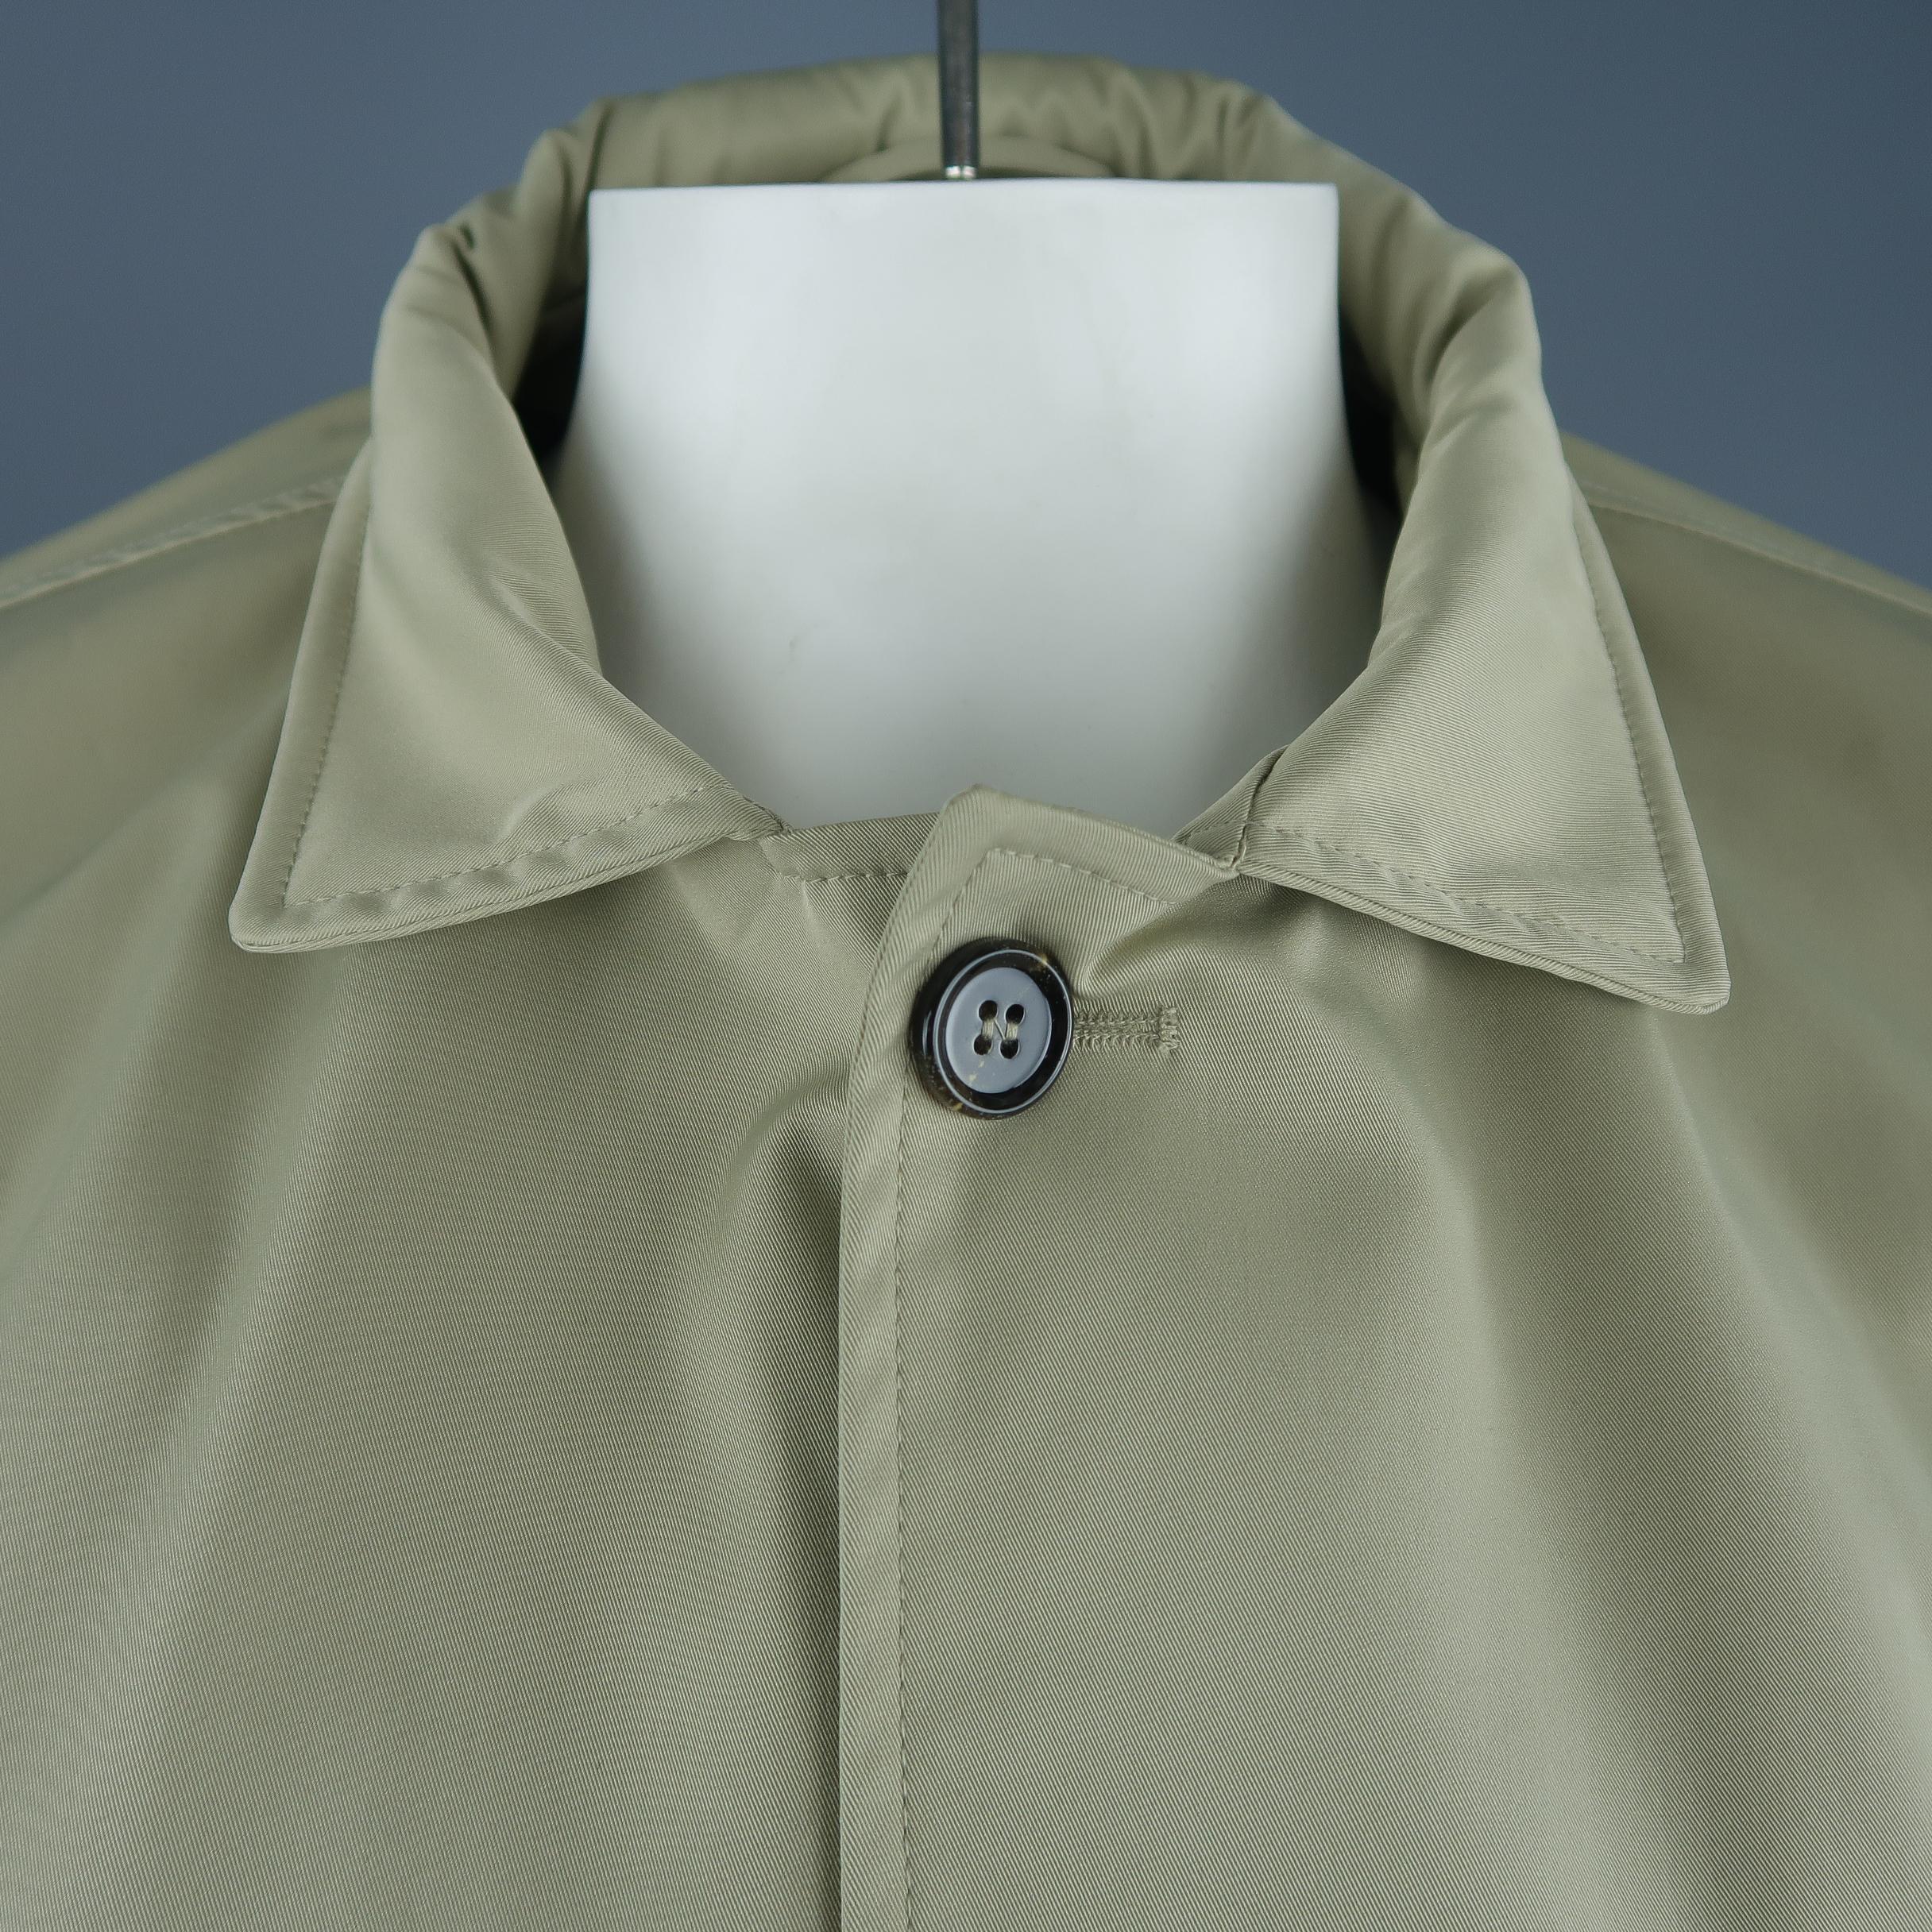 EREDI PISANO raincoat comes in khaki twill with a optional zip hood collar, button up front, slanted pockets, button tab cuffs, and detachable zip pout vest liner. Made in Italy.
 
New with Tags. Retails: $1200.
Marked: (no size)
 
Measurements:
